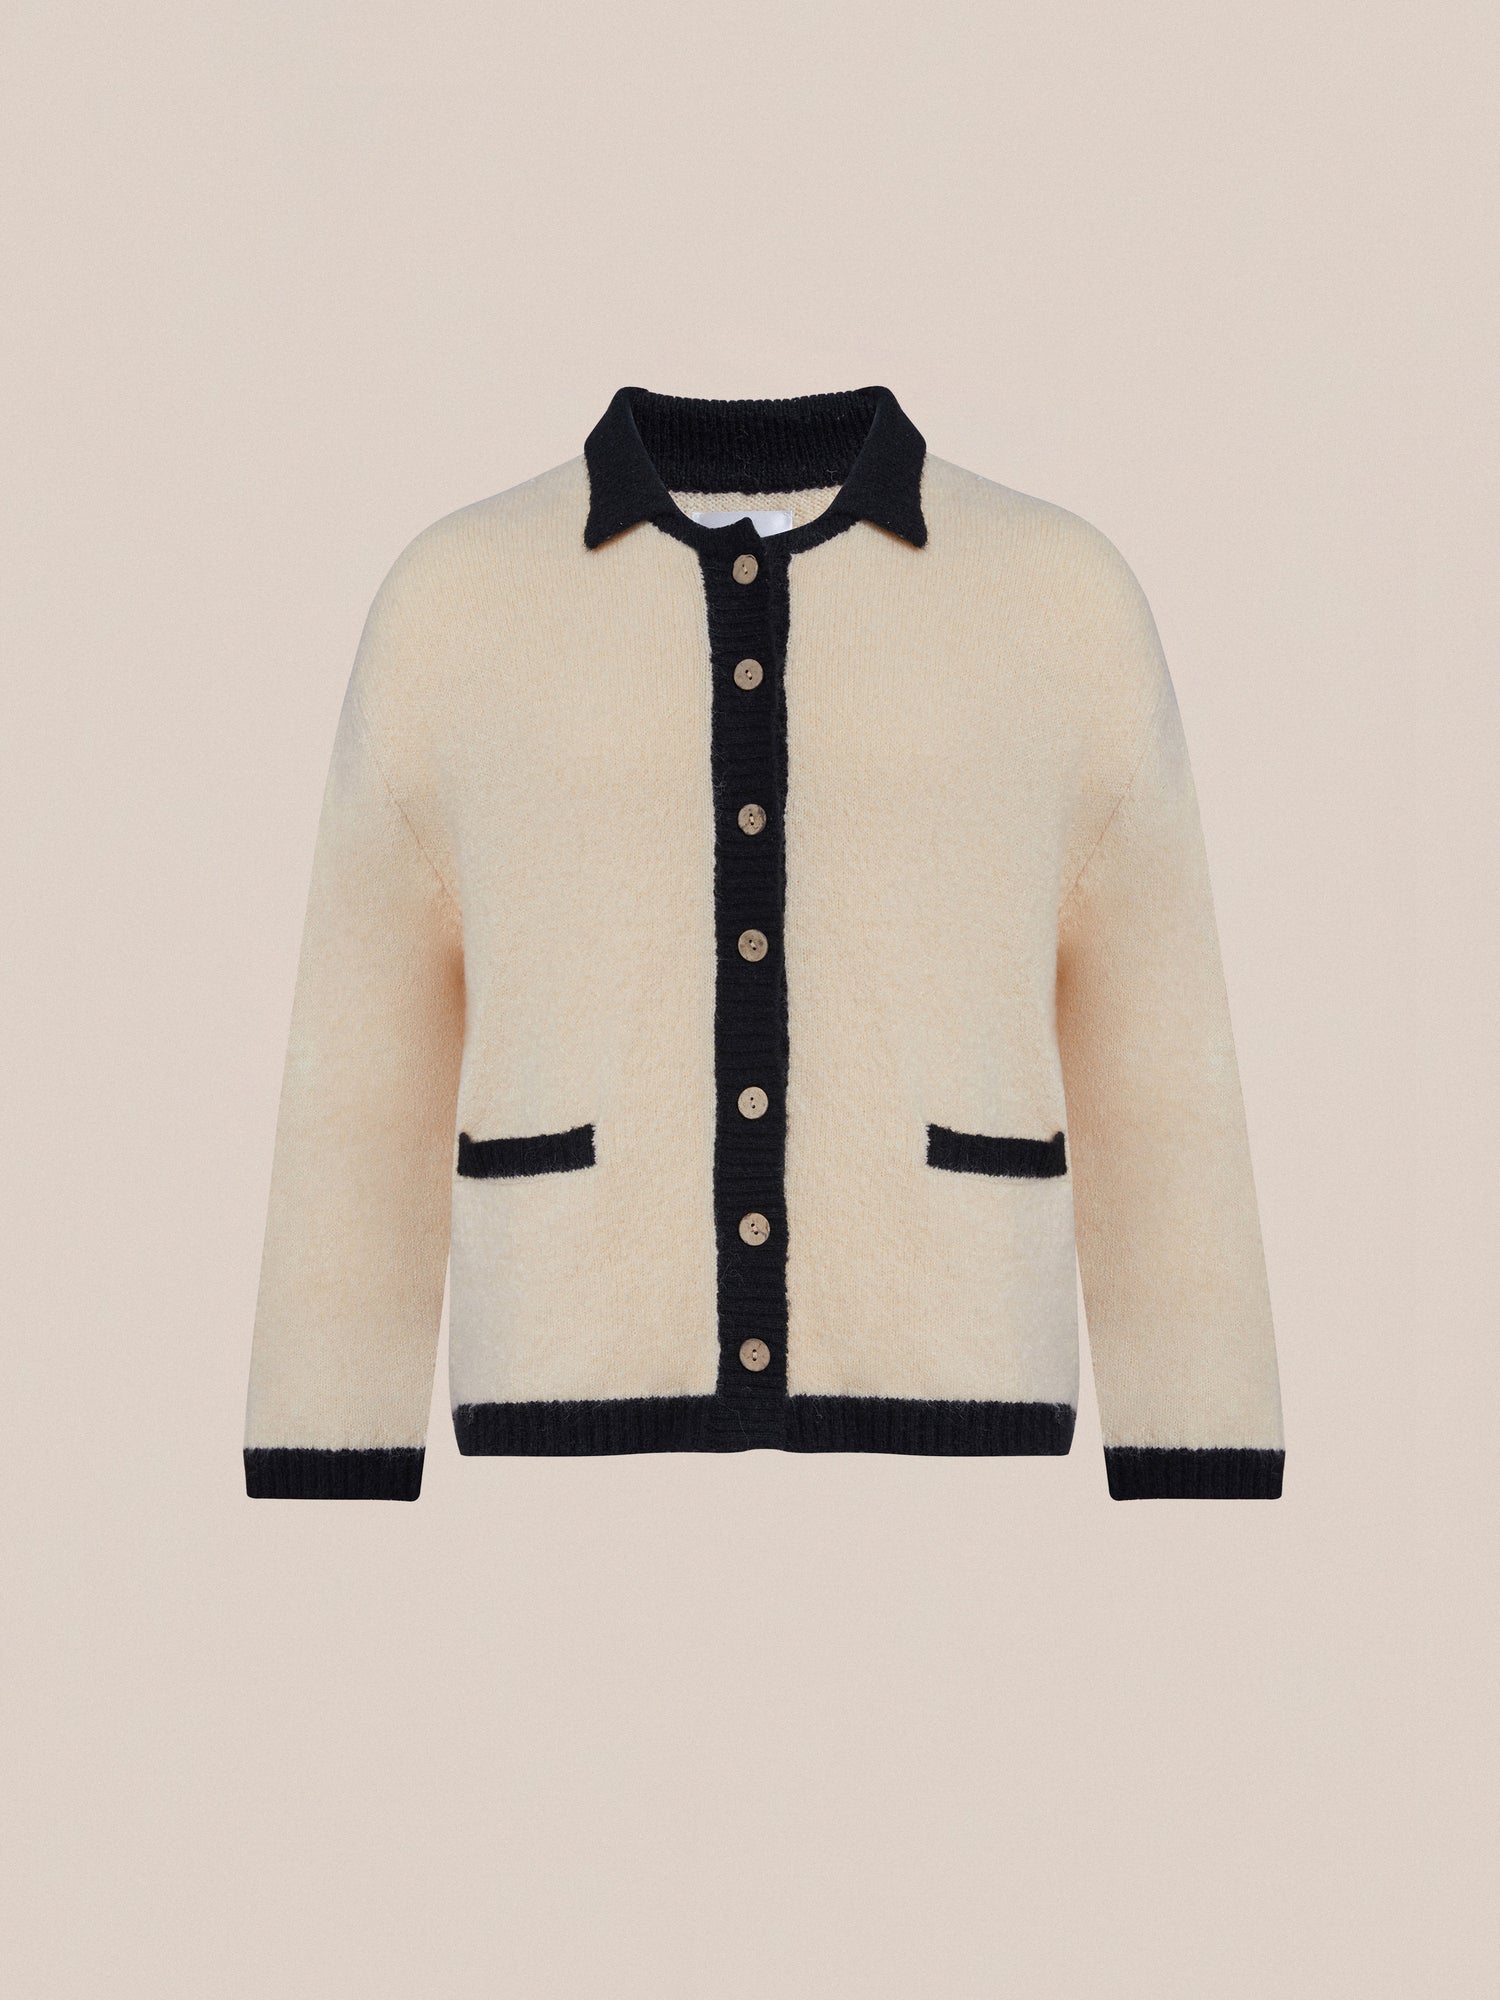 A cream Found Sima Contrast Collar Knitted Cardigan with wooden buttons.